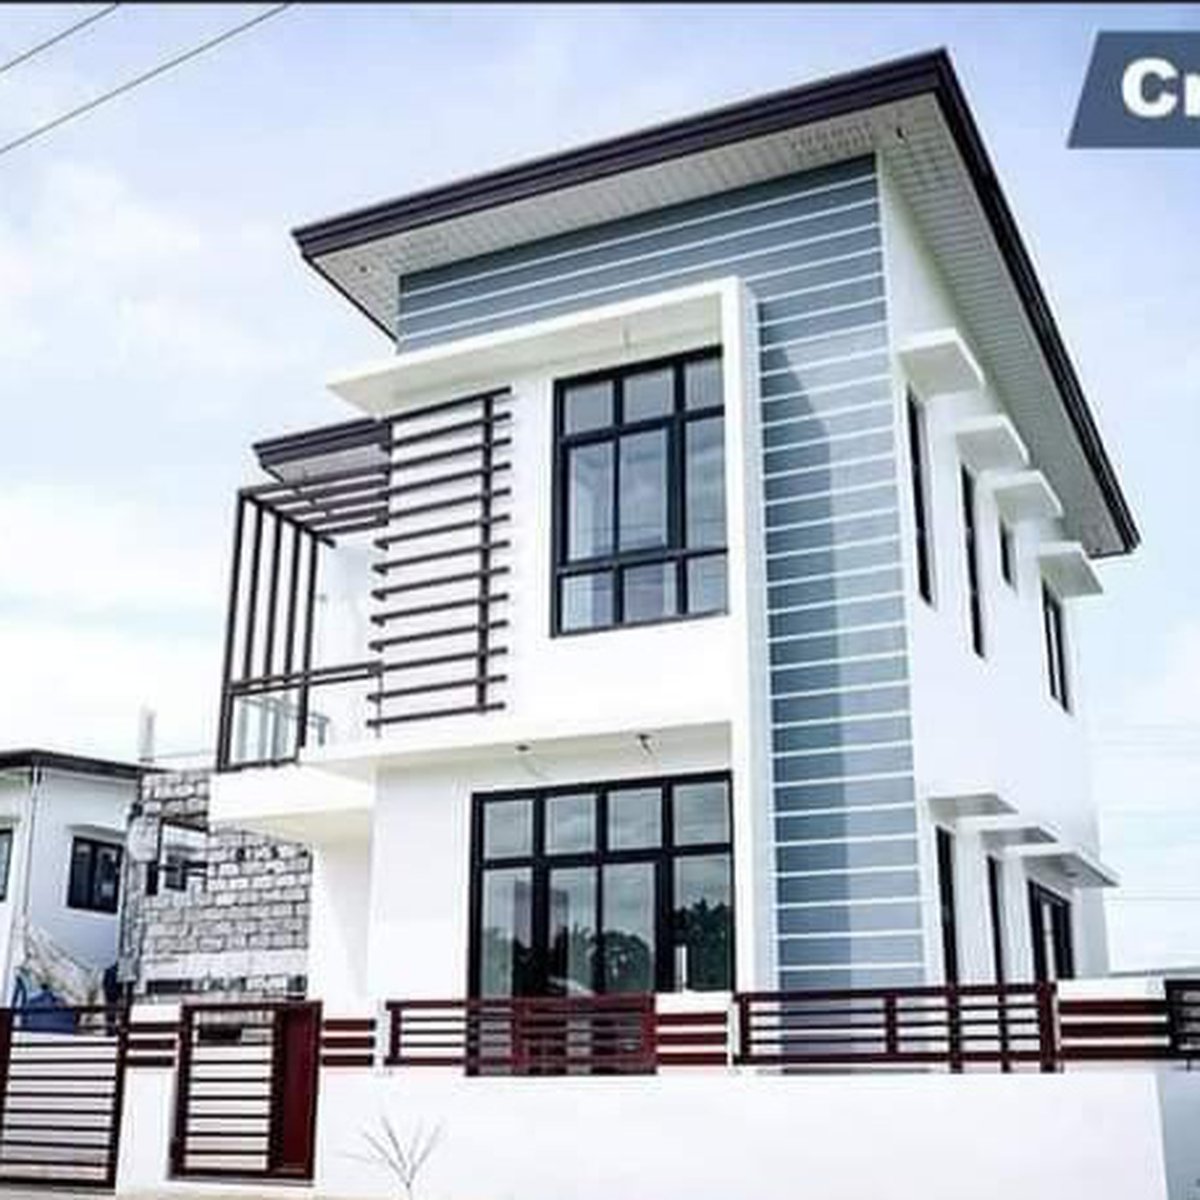 3 bedroom single detached house and lot for sale in batangas city